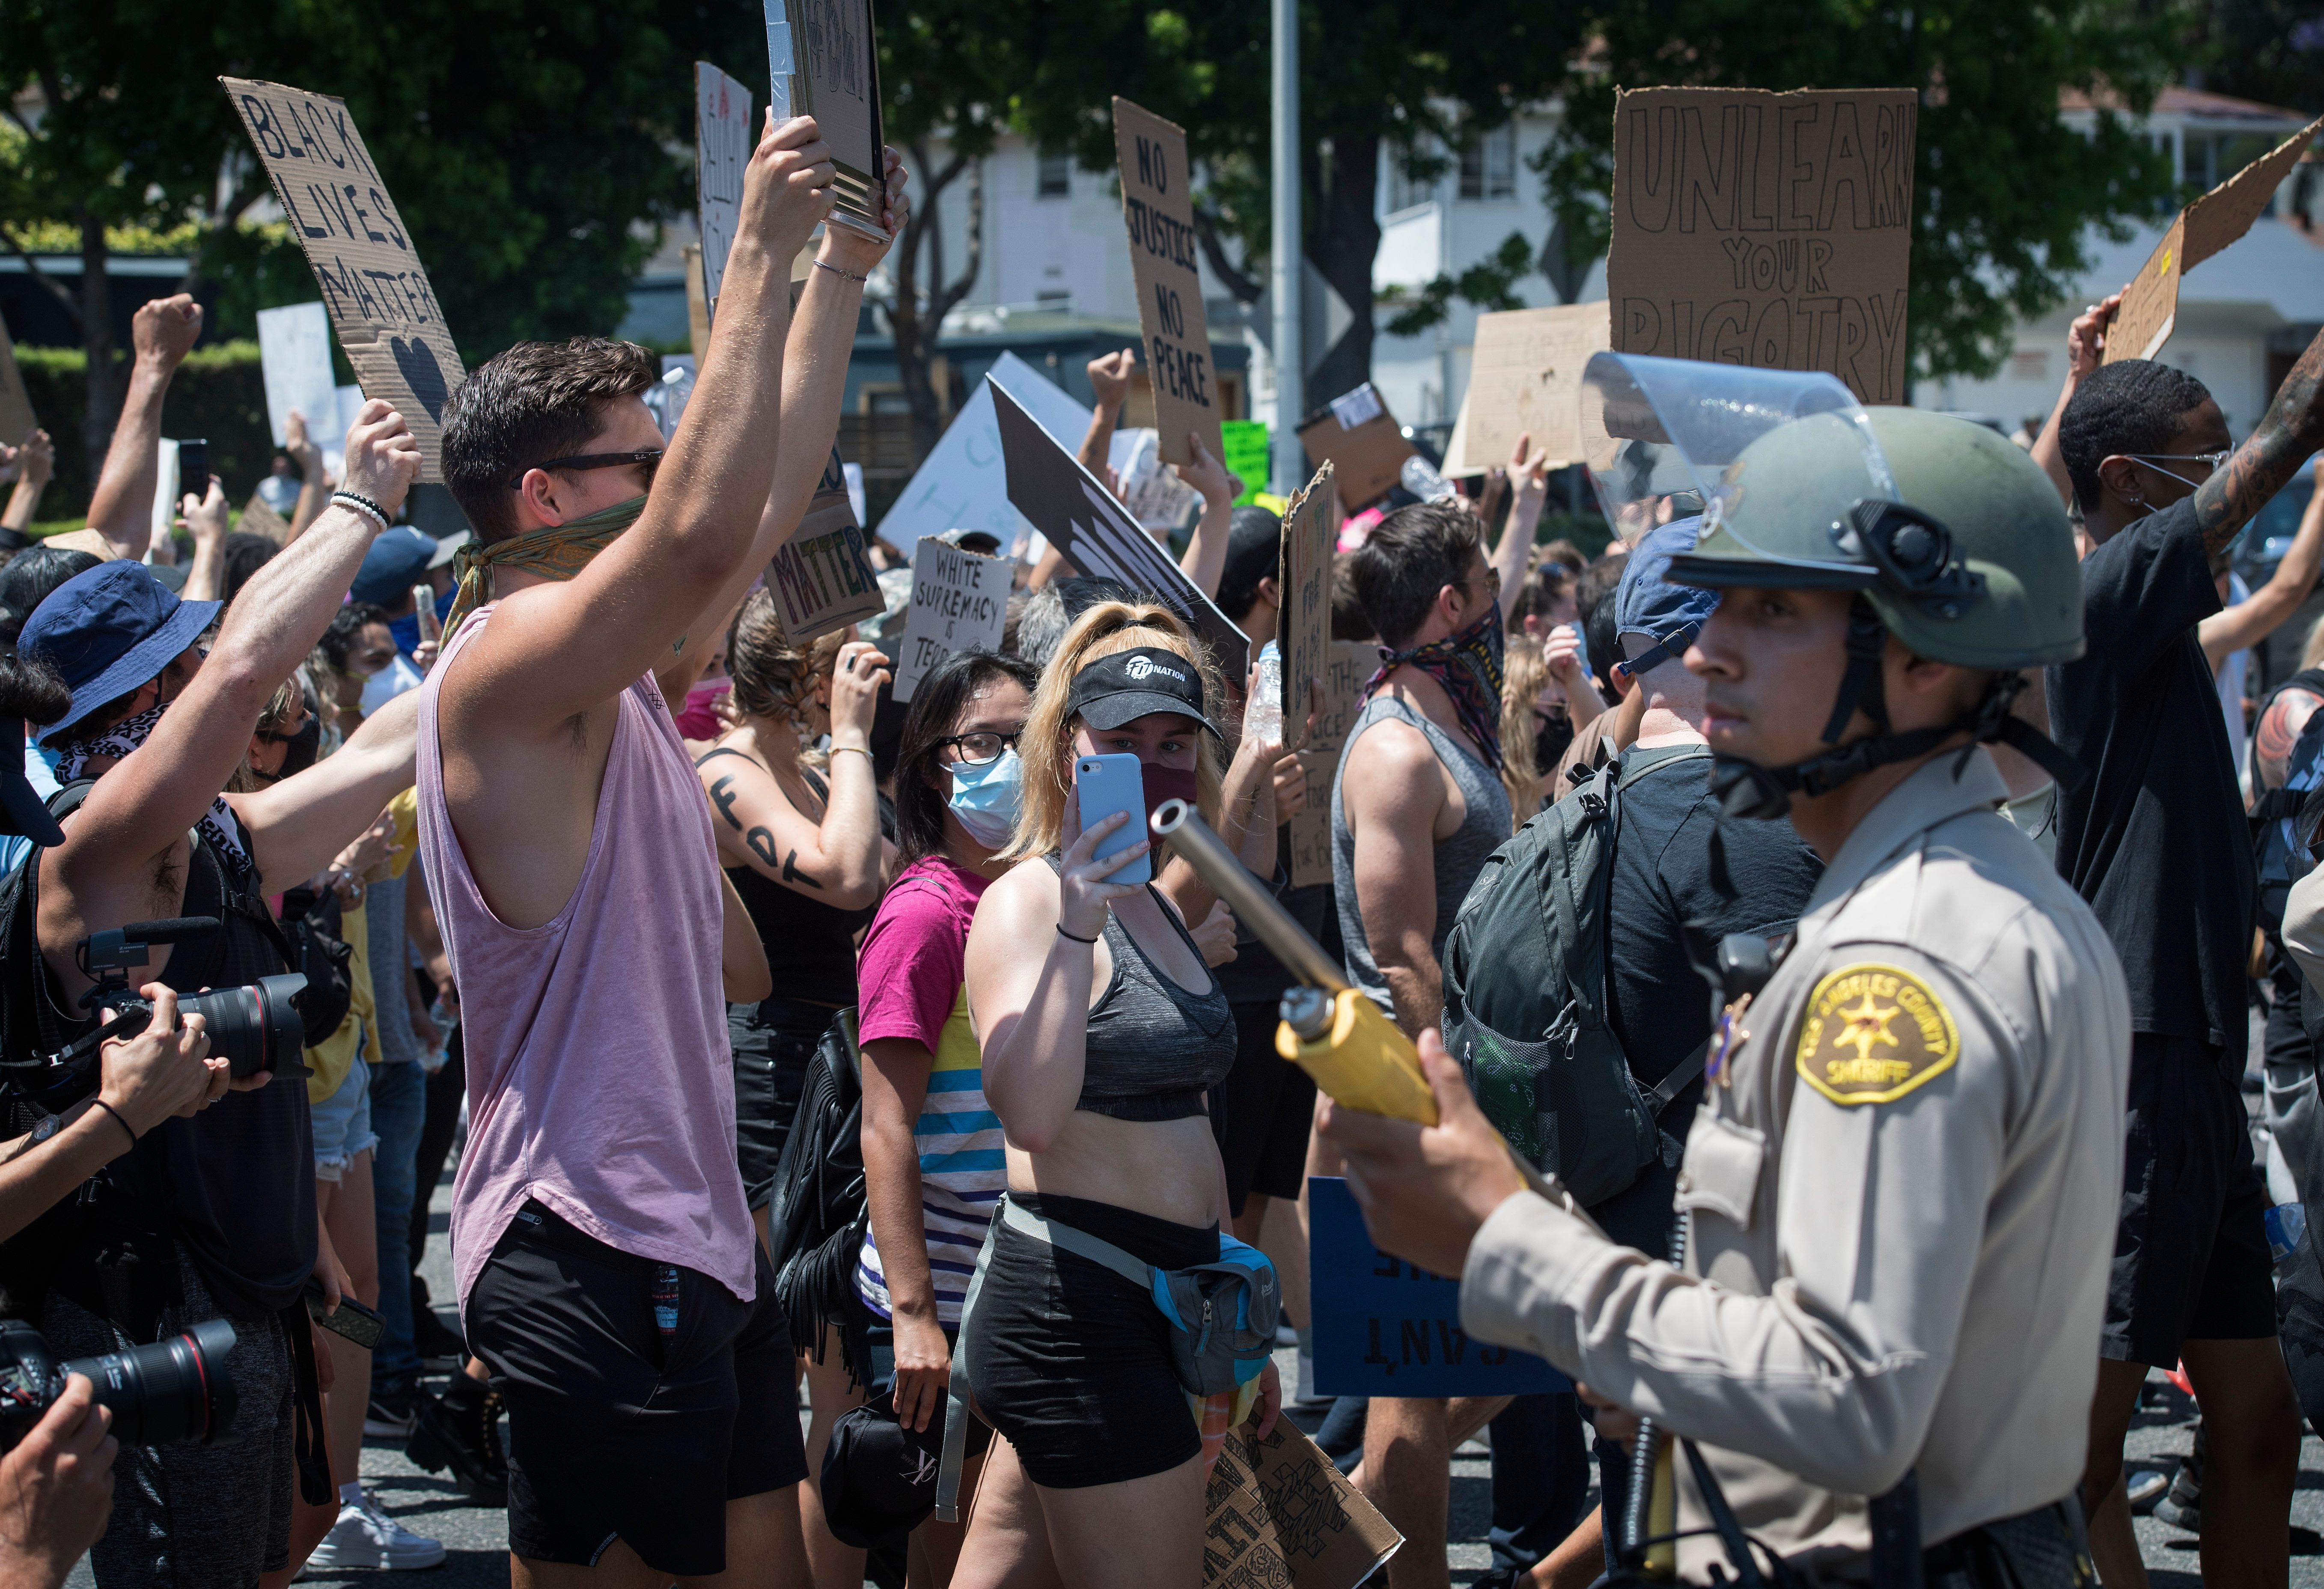 Officers from the Sheriff's Department keep watch as demonstrators continued to protest the death of George Floyd, in West Hollywood, California on June 3, 2020. - Former Minneapolis police officer Derek Chauvin, who kneeled on the neck of George Floyd who later died, will now be charged with second-degree murder, and his three colleagues will face charges of aiding and abetting second-degree murder, court documents revealed on June 3. (Photo by MARK RALSTON/AFP via Getty Images)